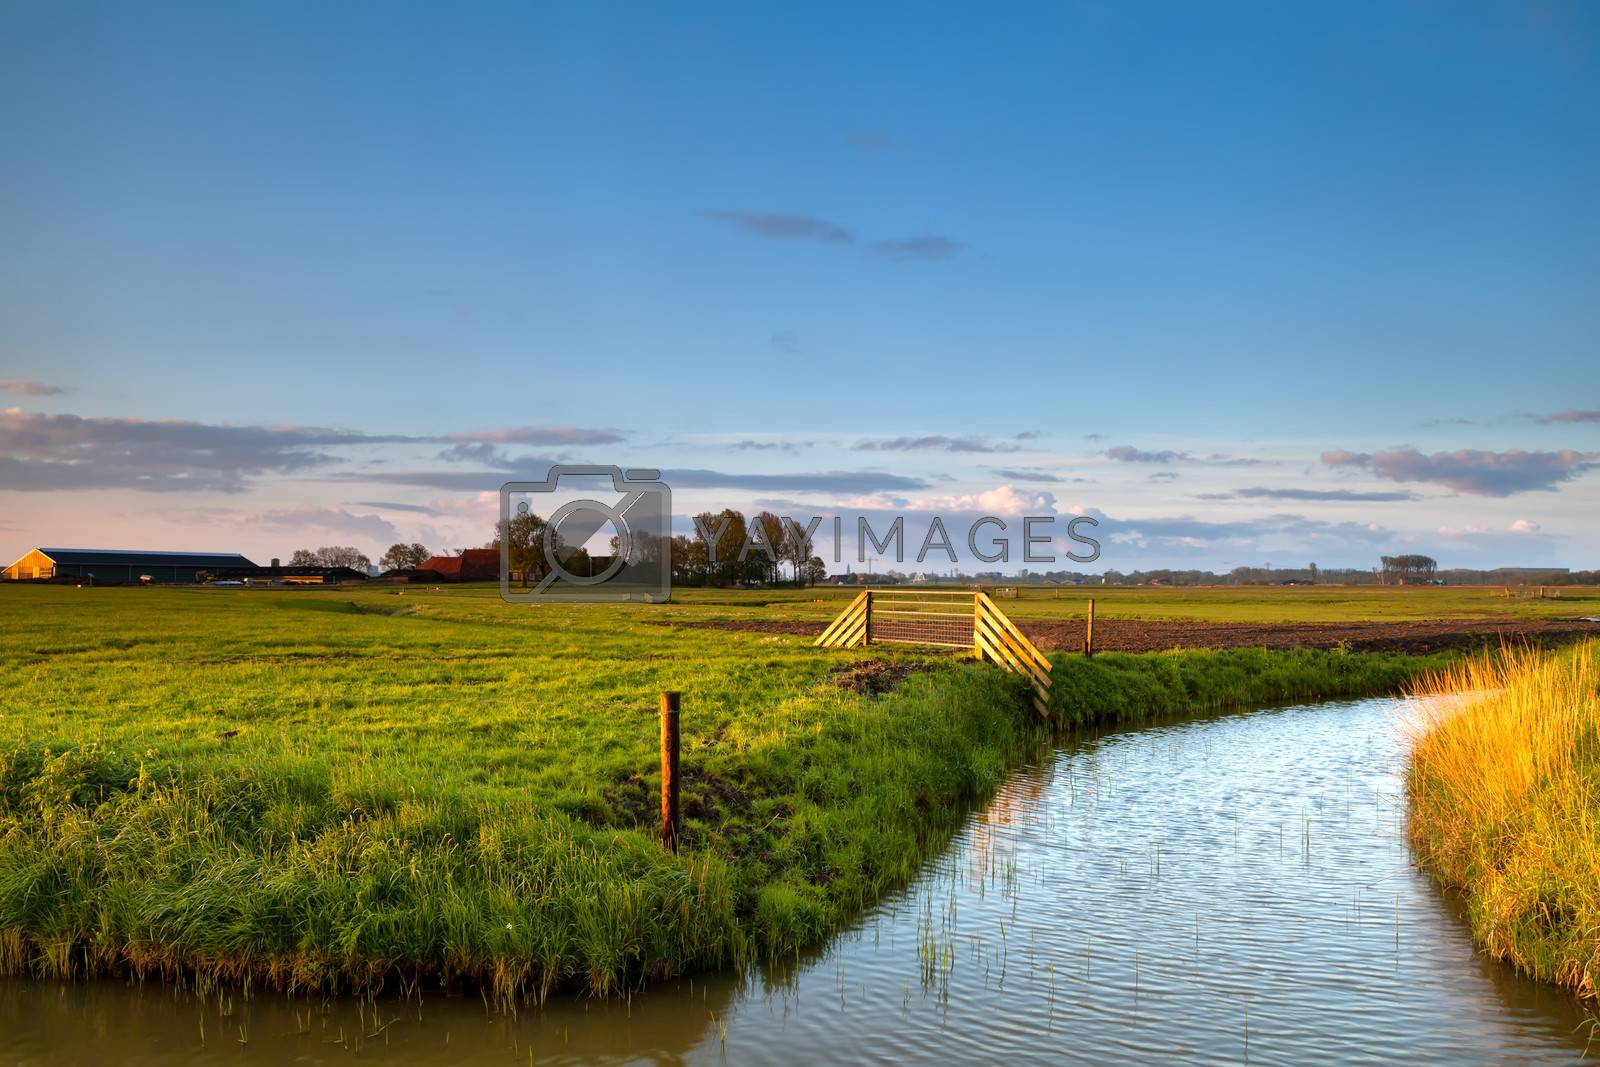 Royalty free image of typical dutch farmland with canals by catolla